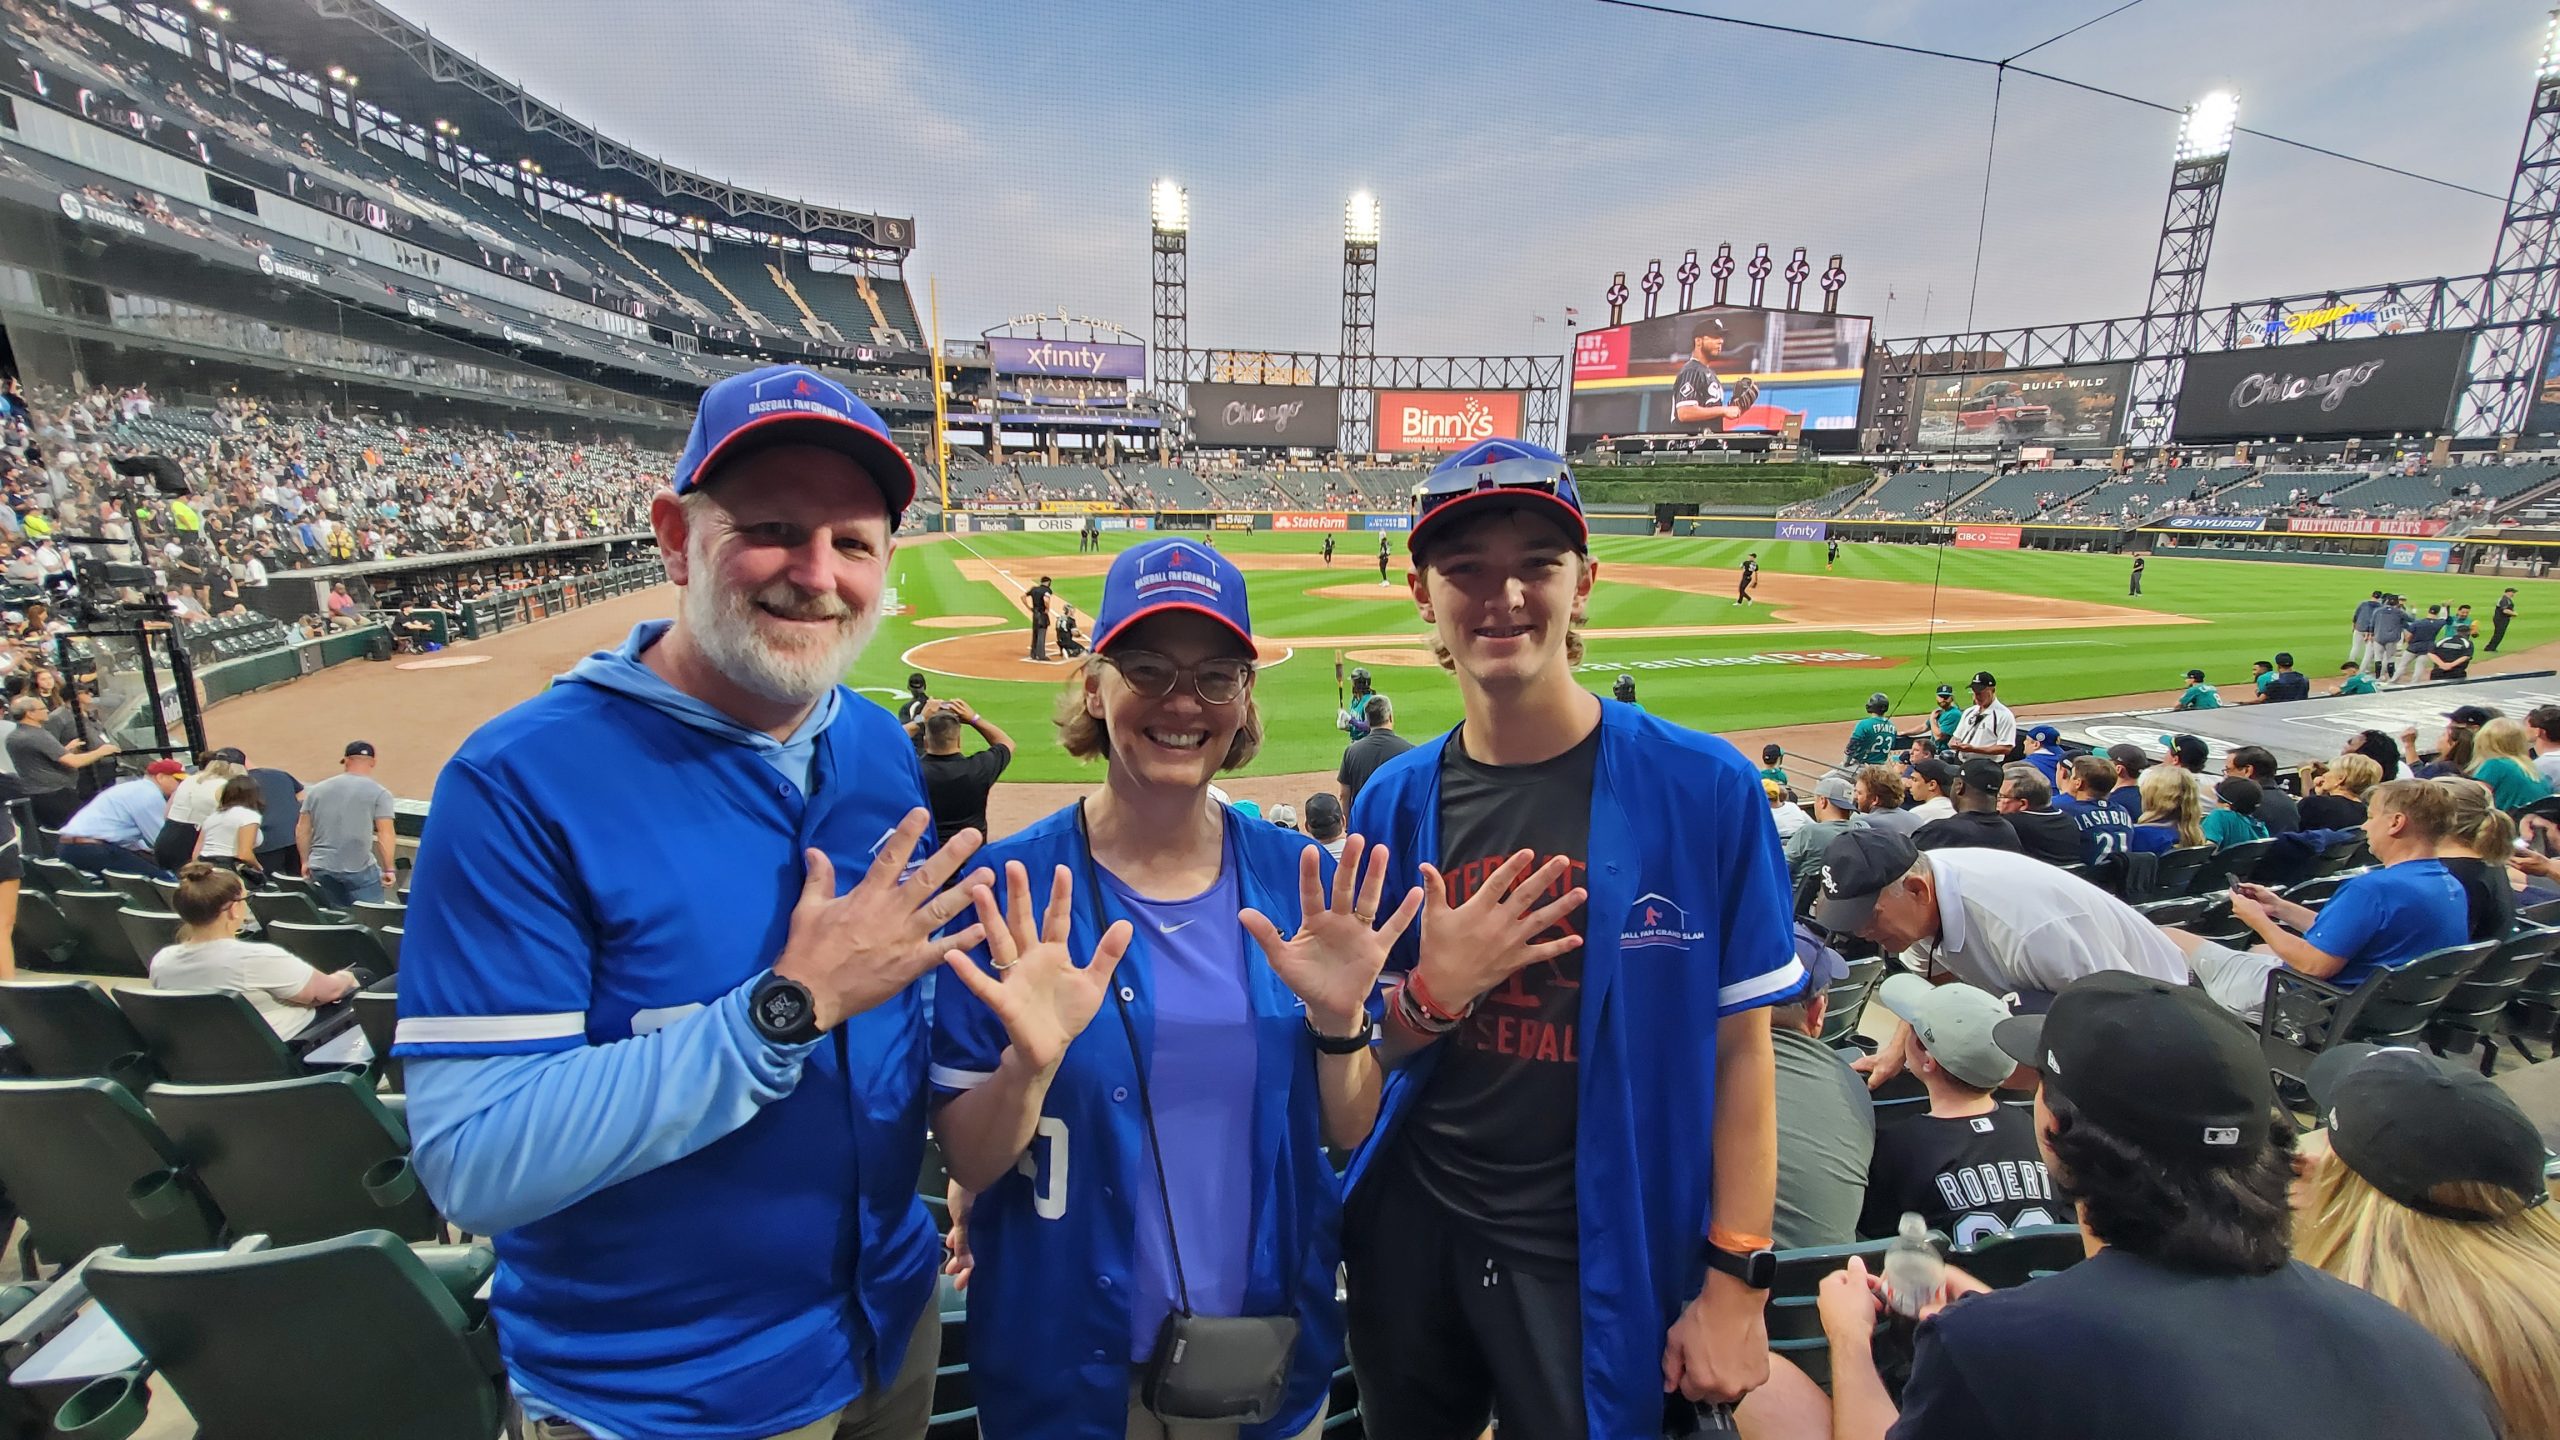 Heather, Brad and Ryan with 20 fingers, representing the 20th stadium visit, at Guaranteed Rate Field.